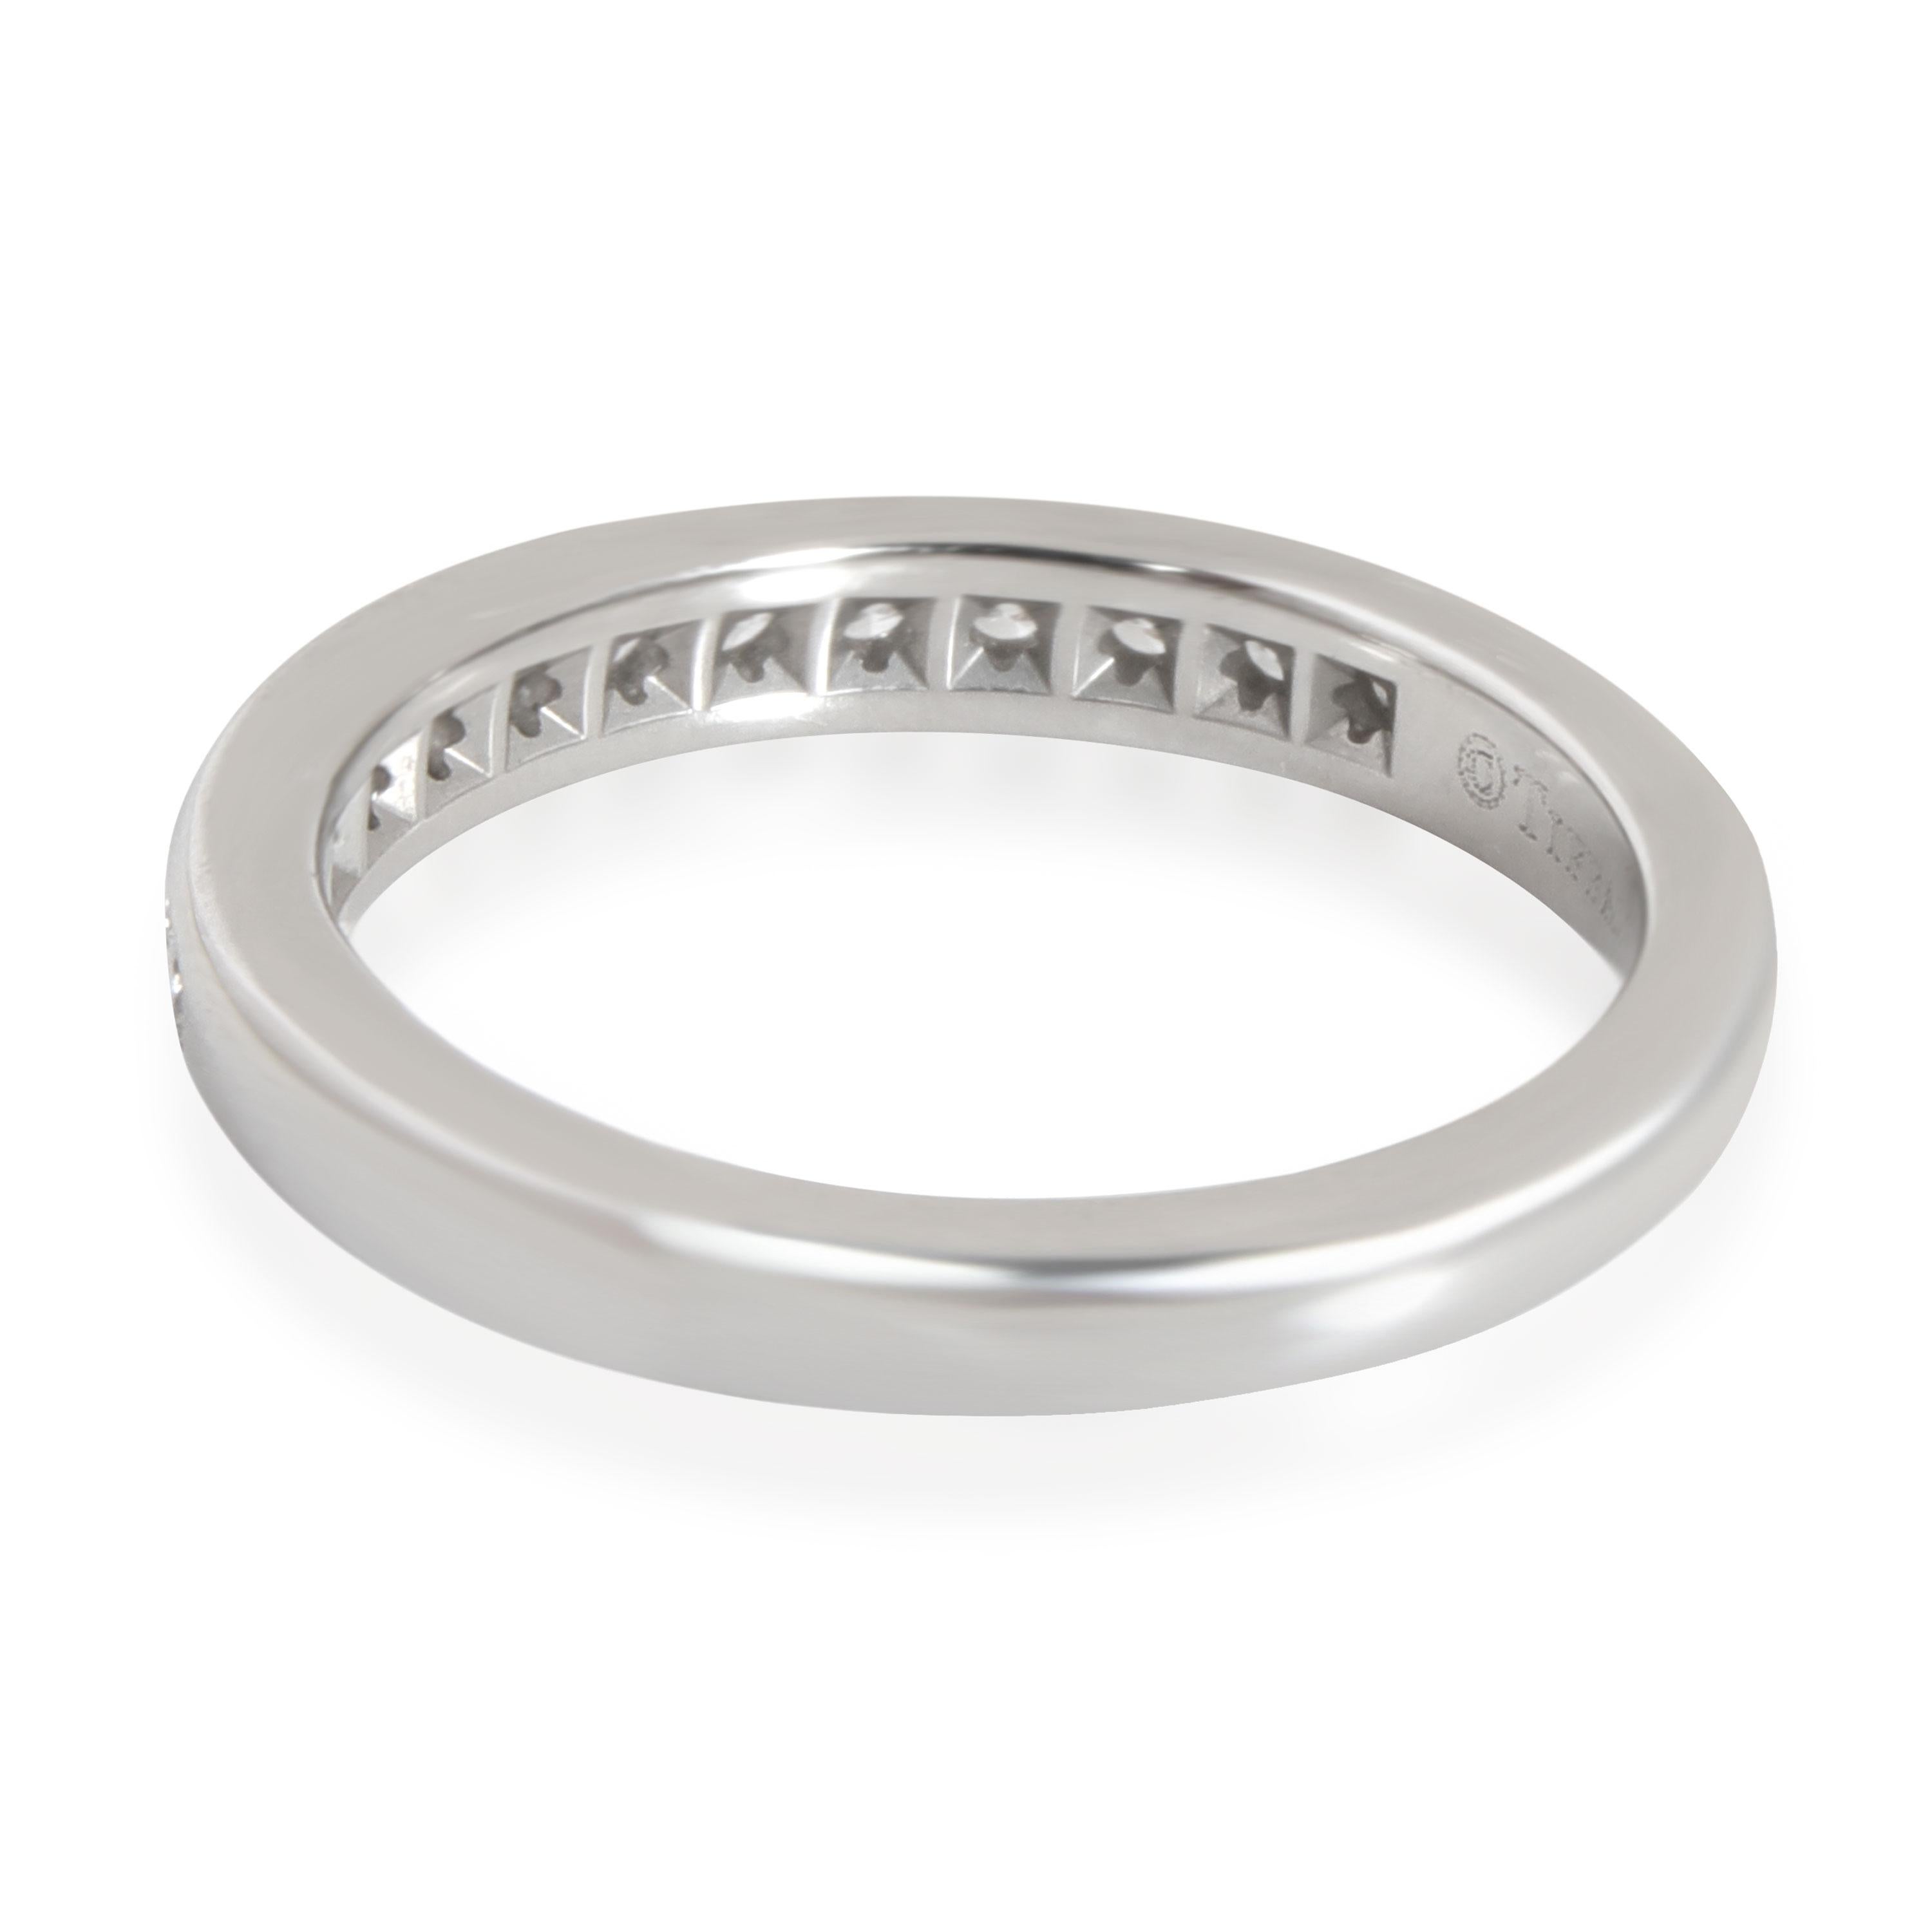 Tiffany & Co. Channel Diamond Wedding Band in Platinum 0.24 CTW

PRIMARY DETAILS
SKU: 110799
Listing Title: Tiffany & Co. Channel Diamond Wedding Band in Platinum 0.24 CTW
Condition Description: Retails for 2,900 USD. In excellent condition and